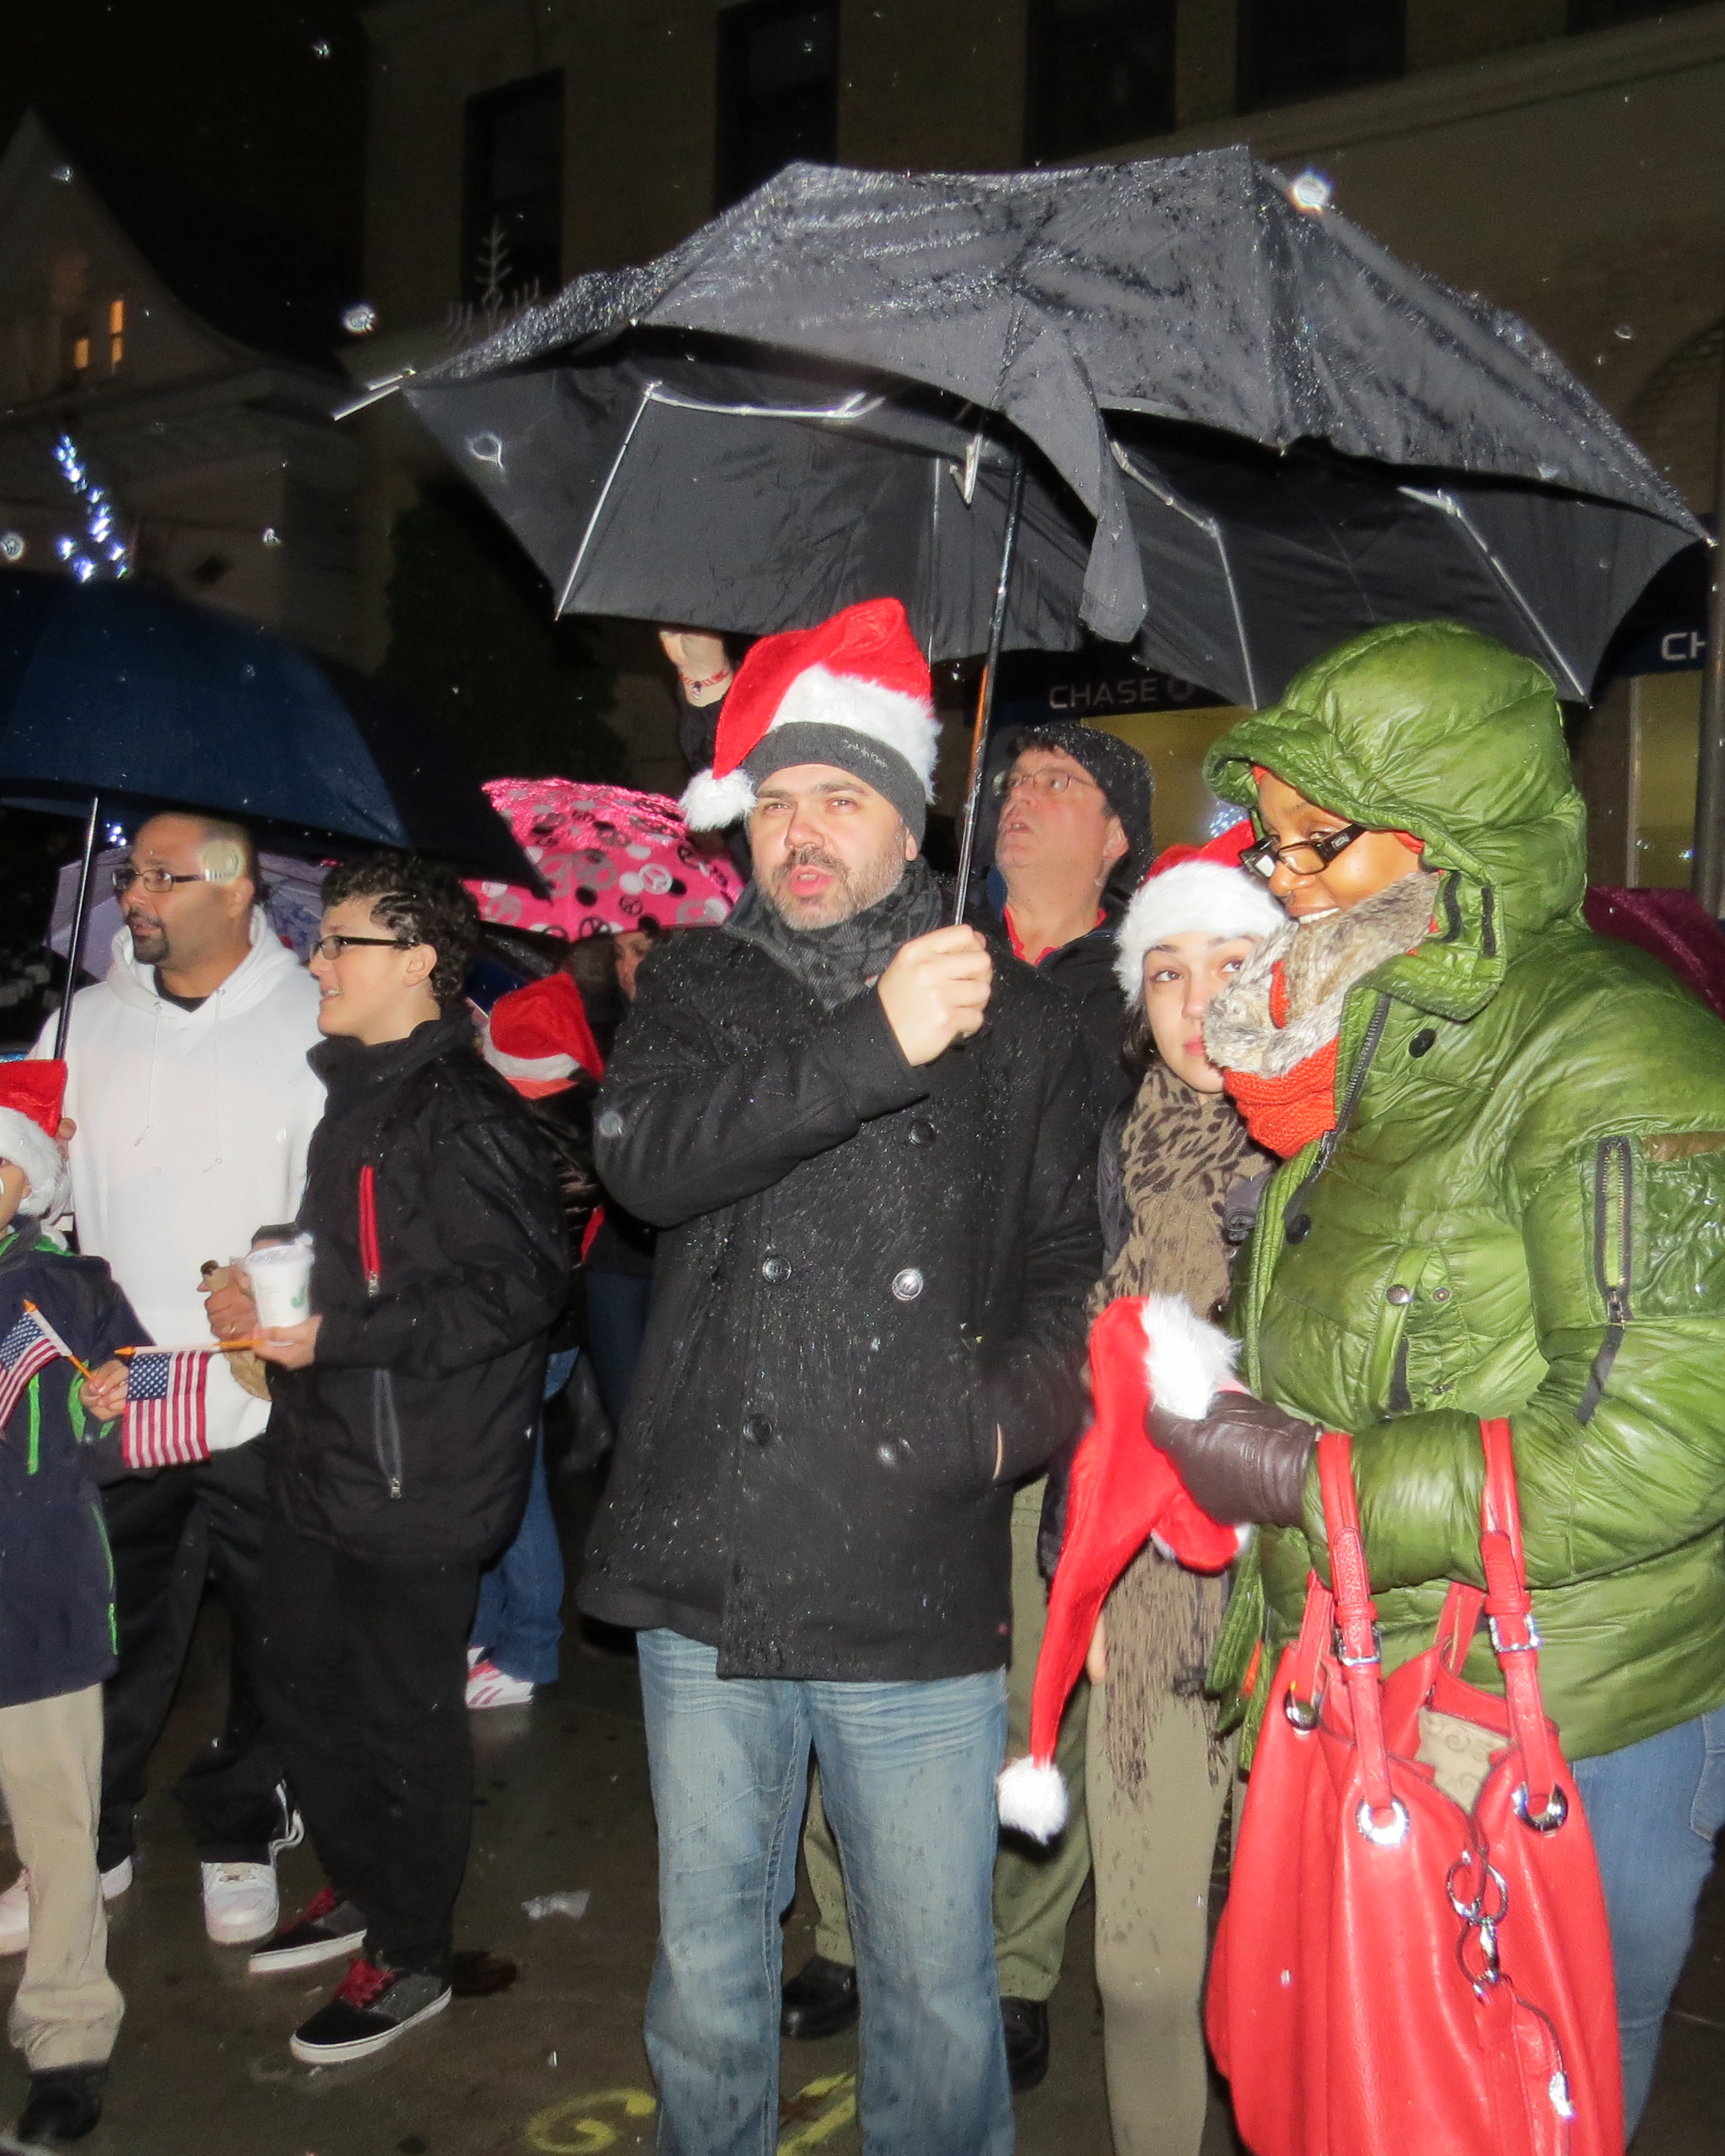 Rain wasn’t enough to dampen the spirits of families who crowded under umbrellas waiting for the countdown to light the tree.